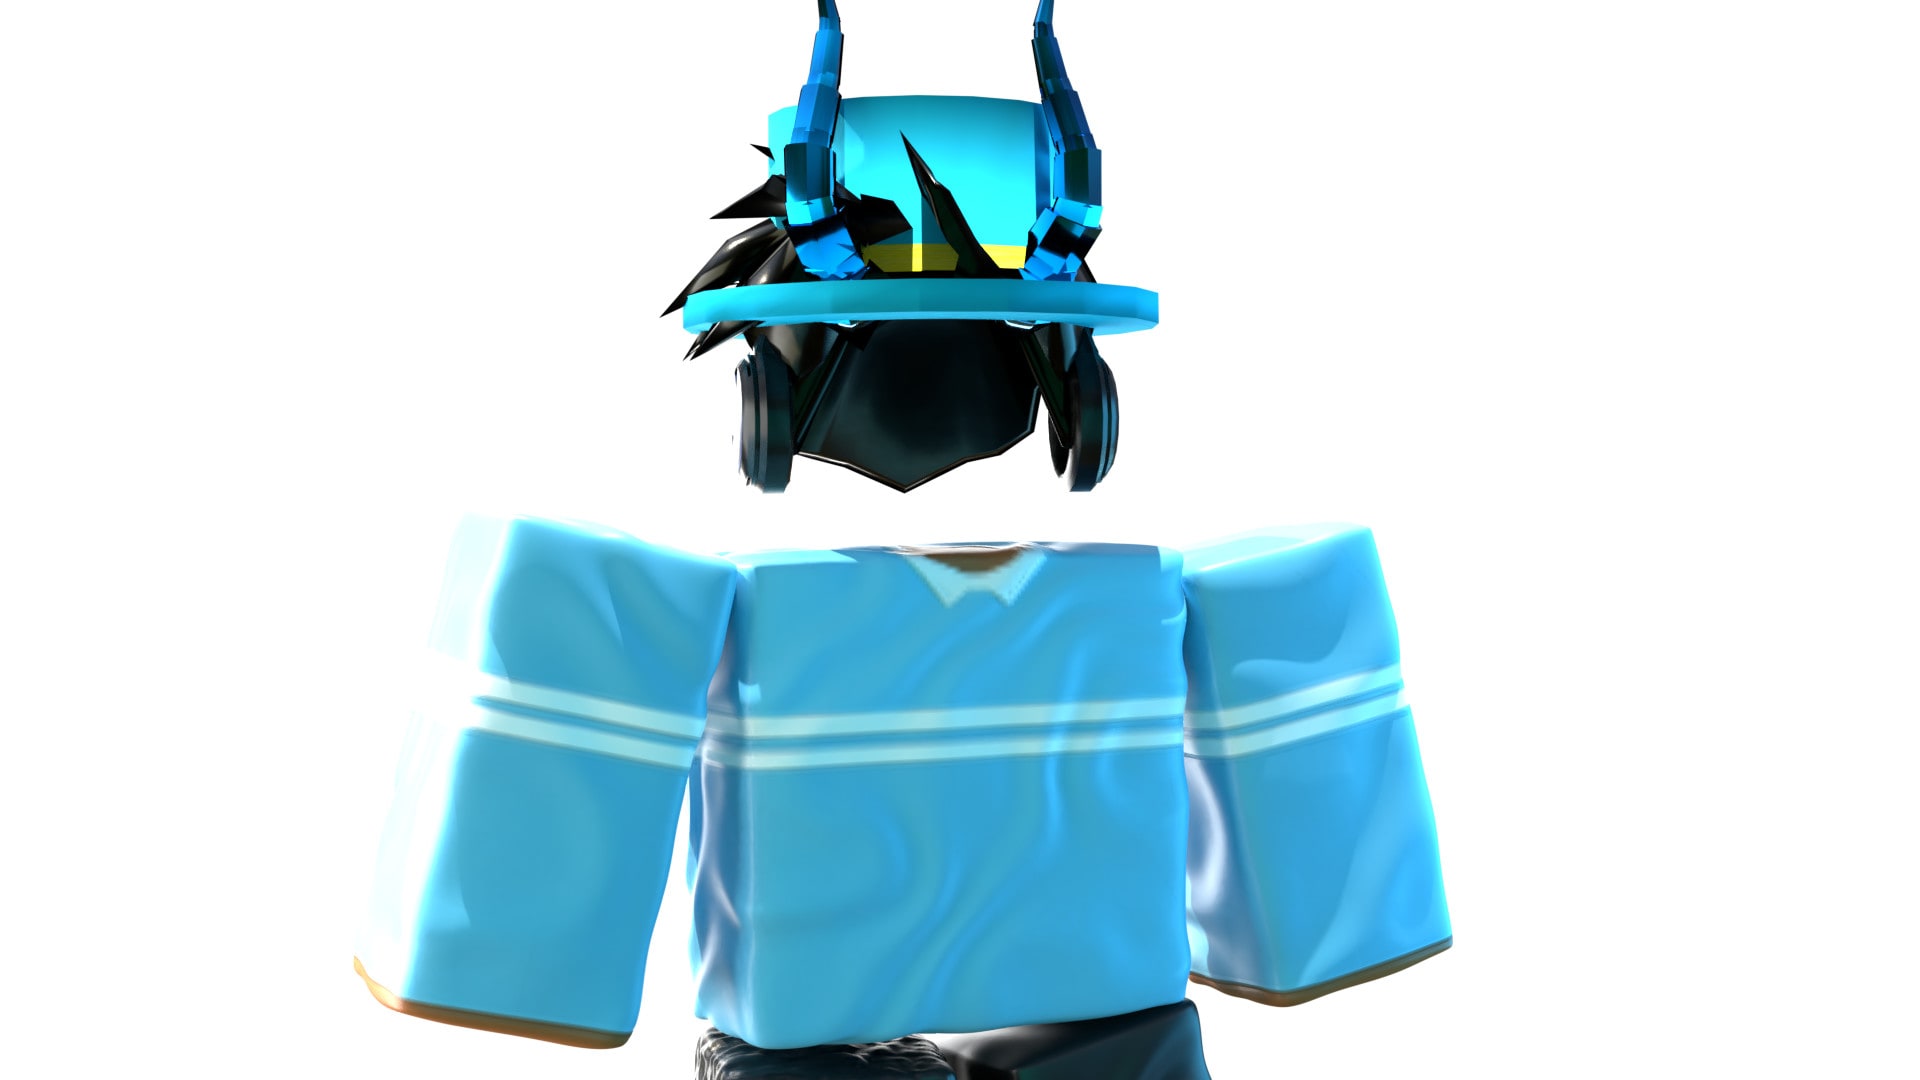 create you a high quality gfx render of your roblox avatar